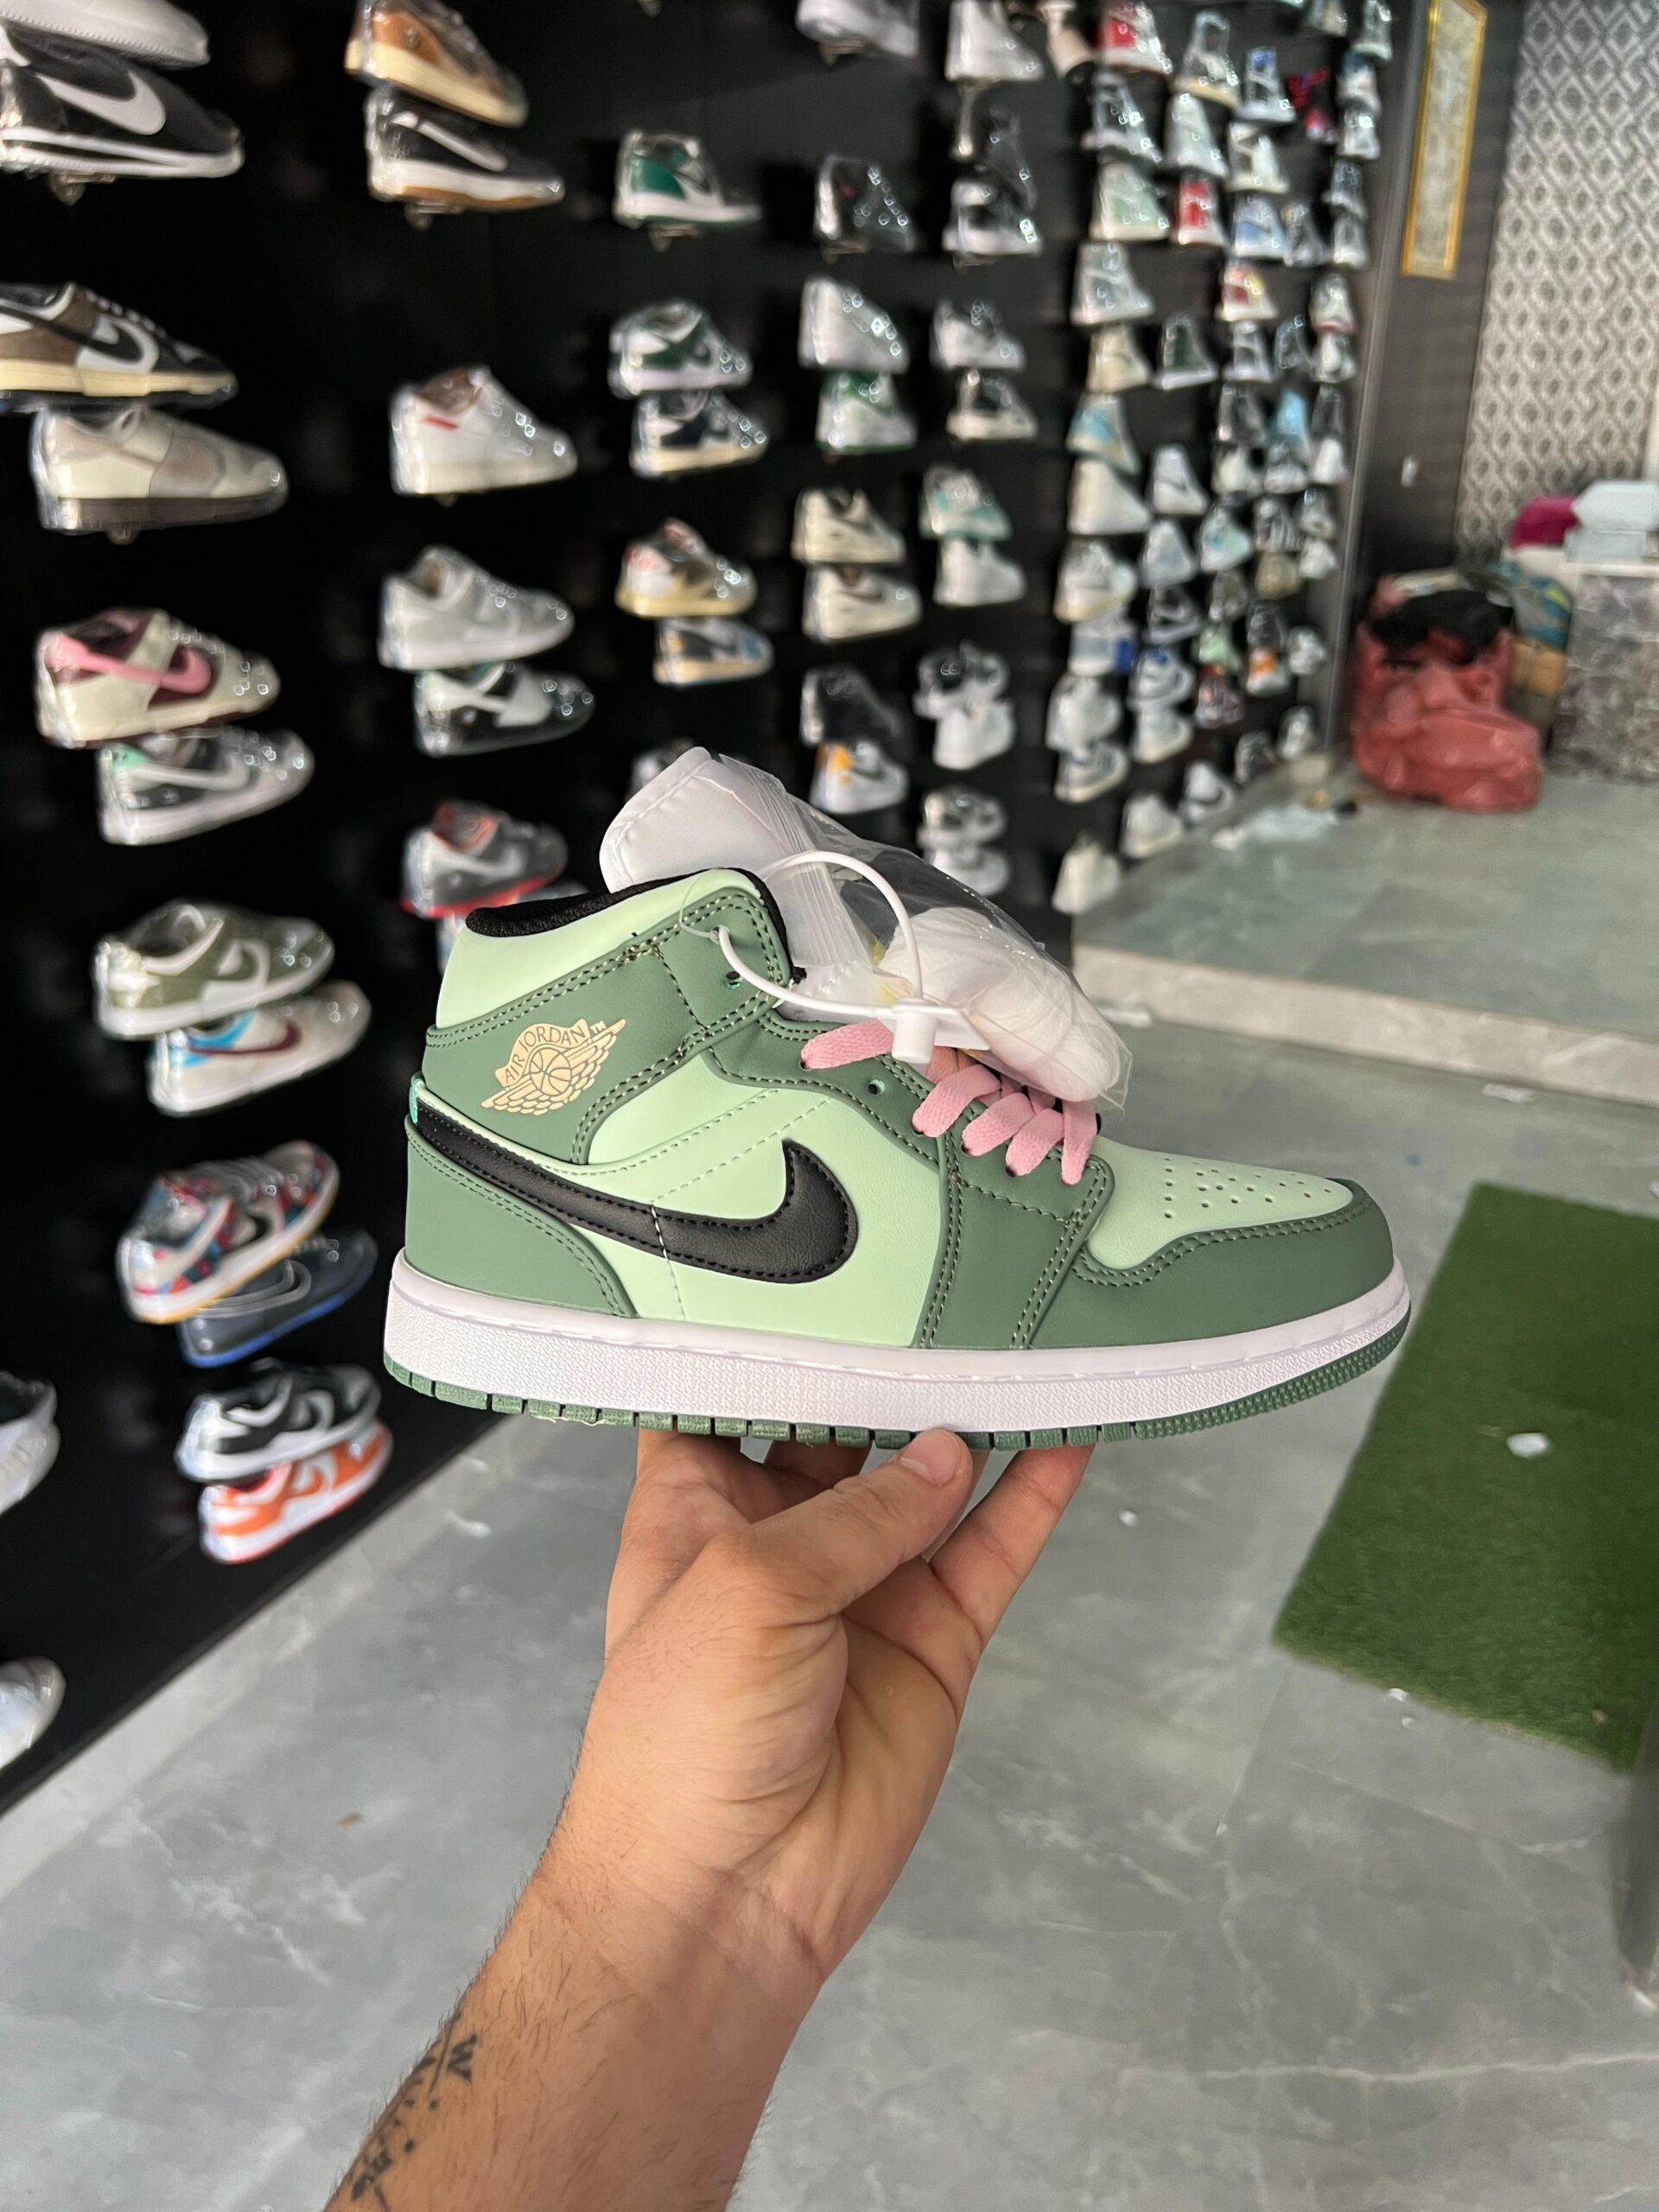 Dutch Green Retro One Sneakers For Girls